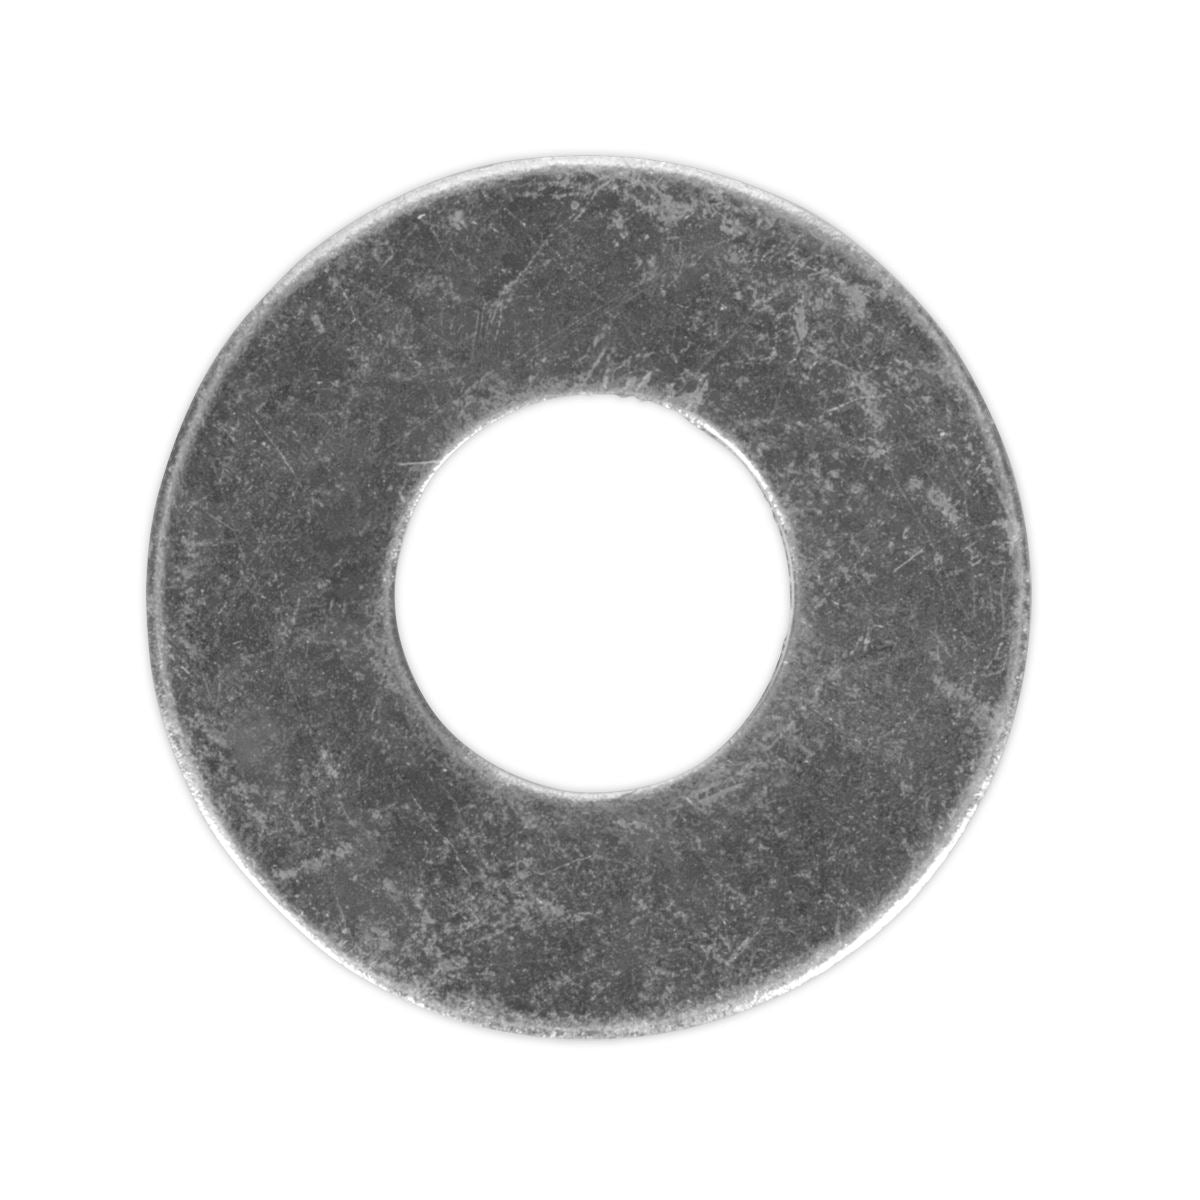 Sealey Flat Washer BS 4320 M10 x 24mm Form C Pack of 100